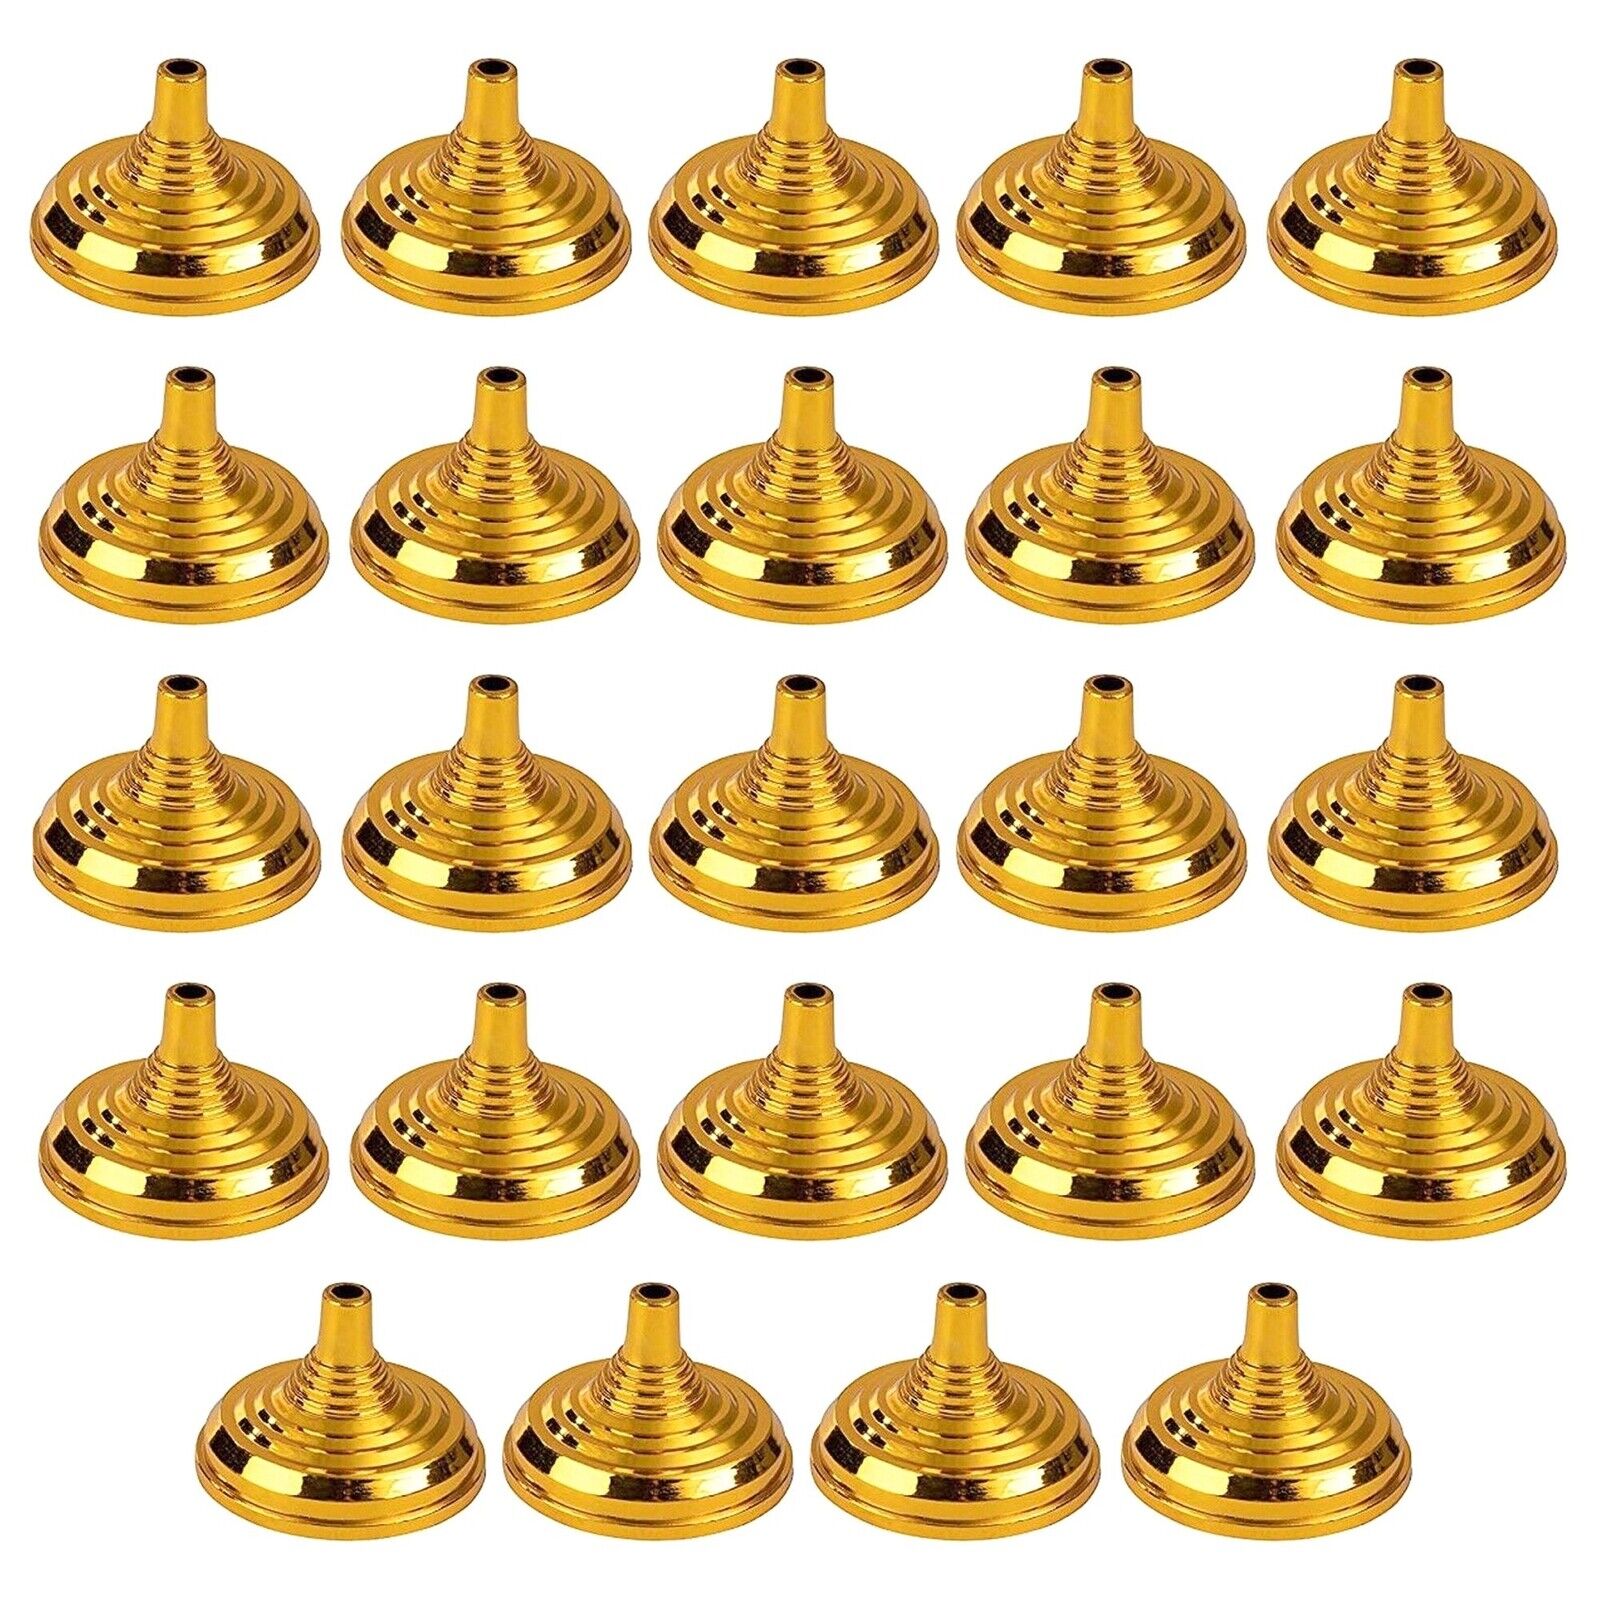 24 Pack Mini Flag Holder Stands for Small Flags, Office Desk, Gold, 2.1 x 1.5 In